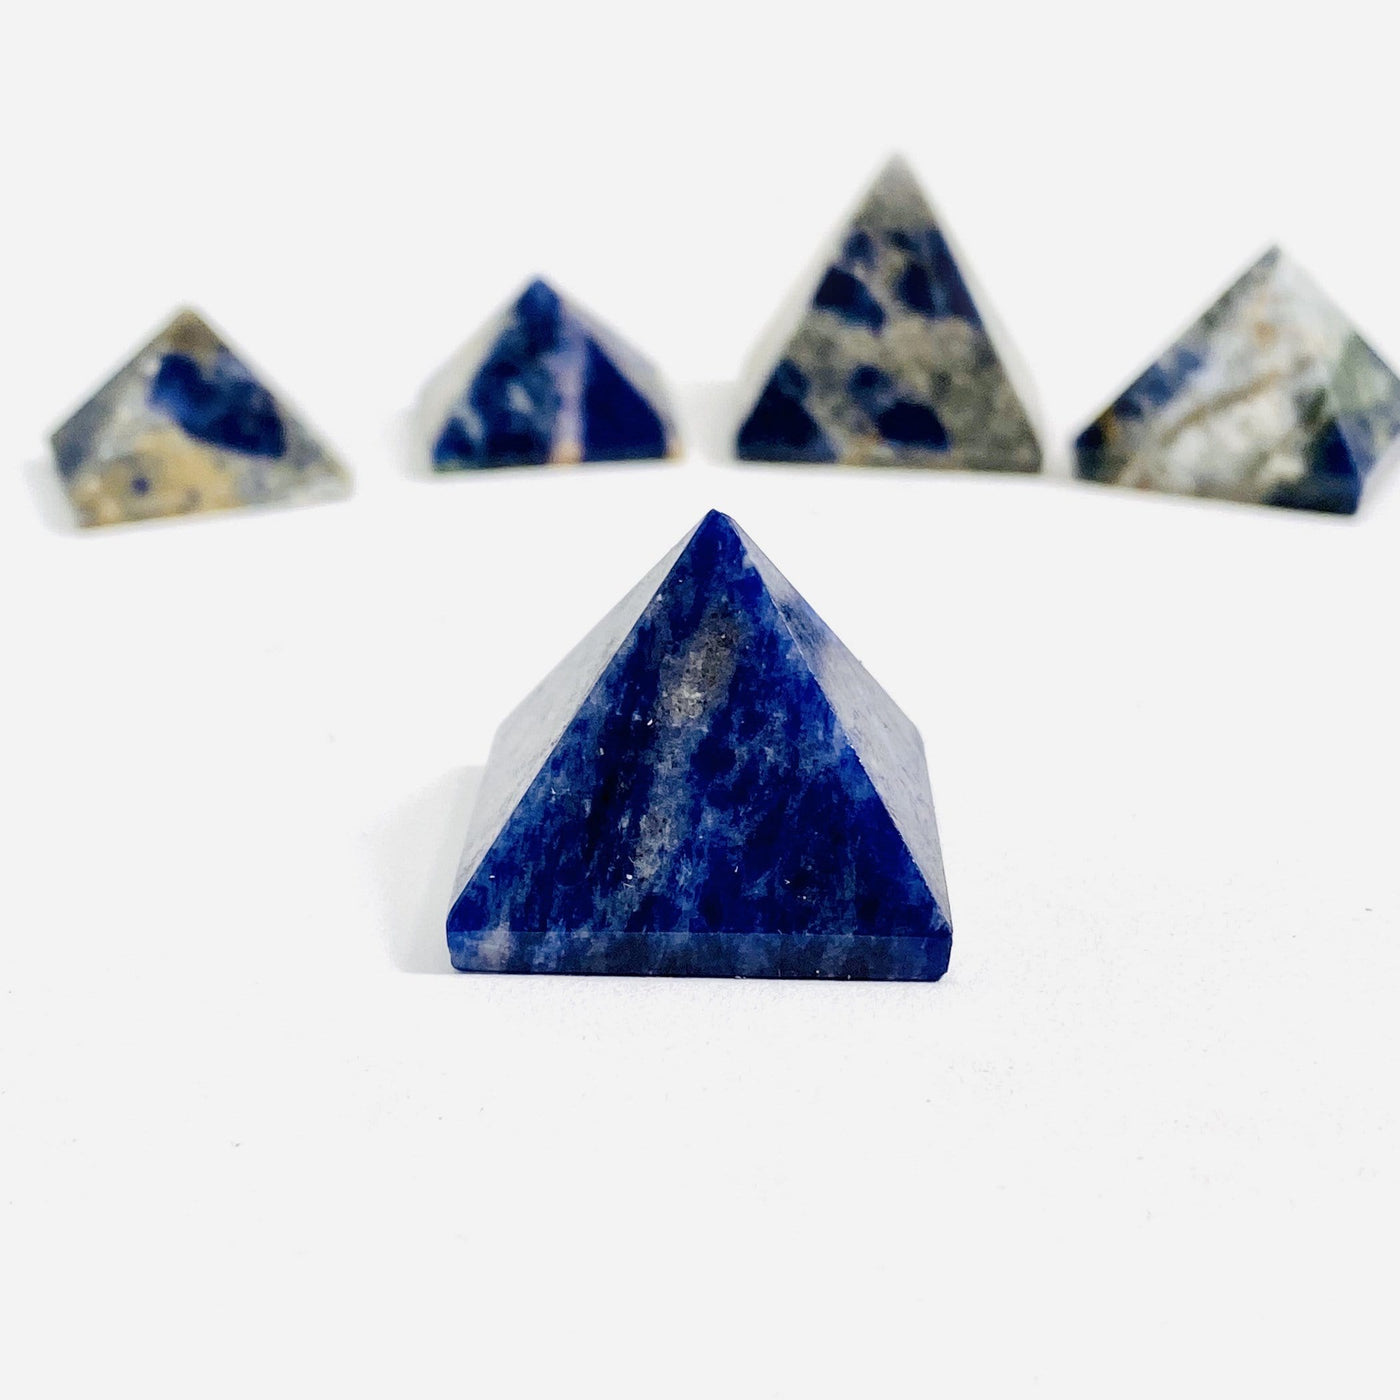 close up of one sodalite pyramid on a white background with four others in the background